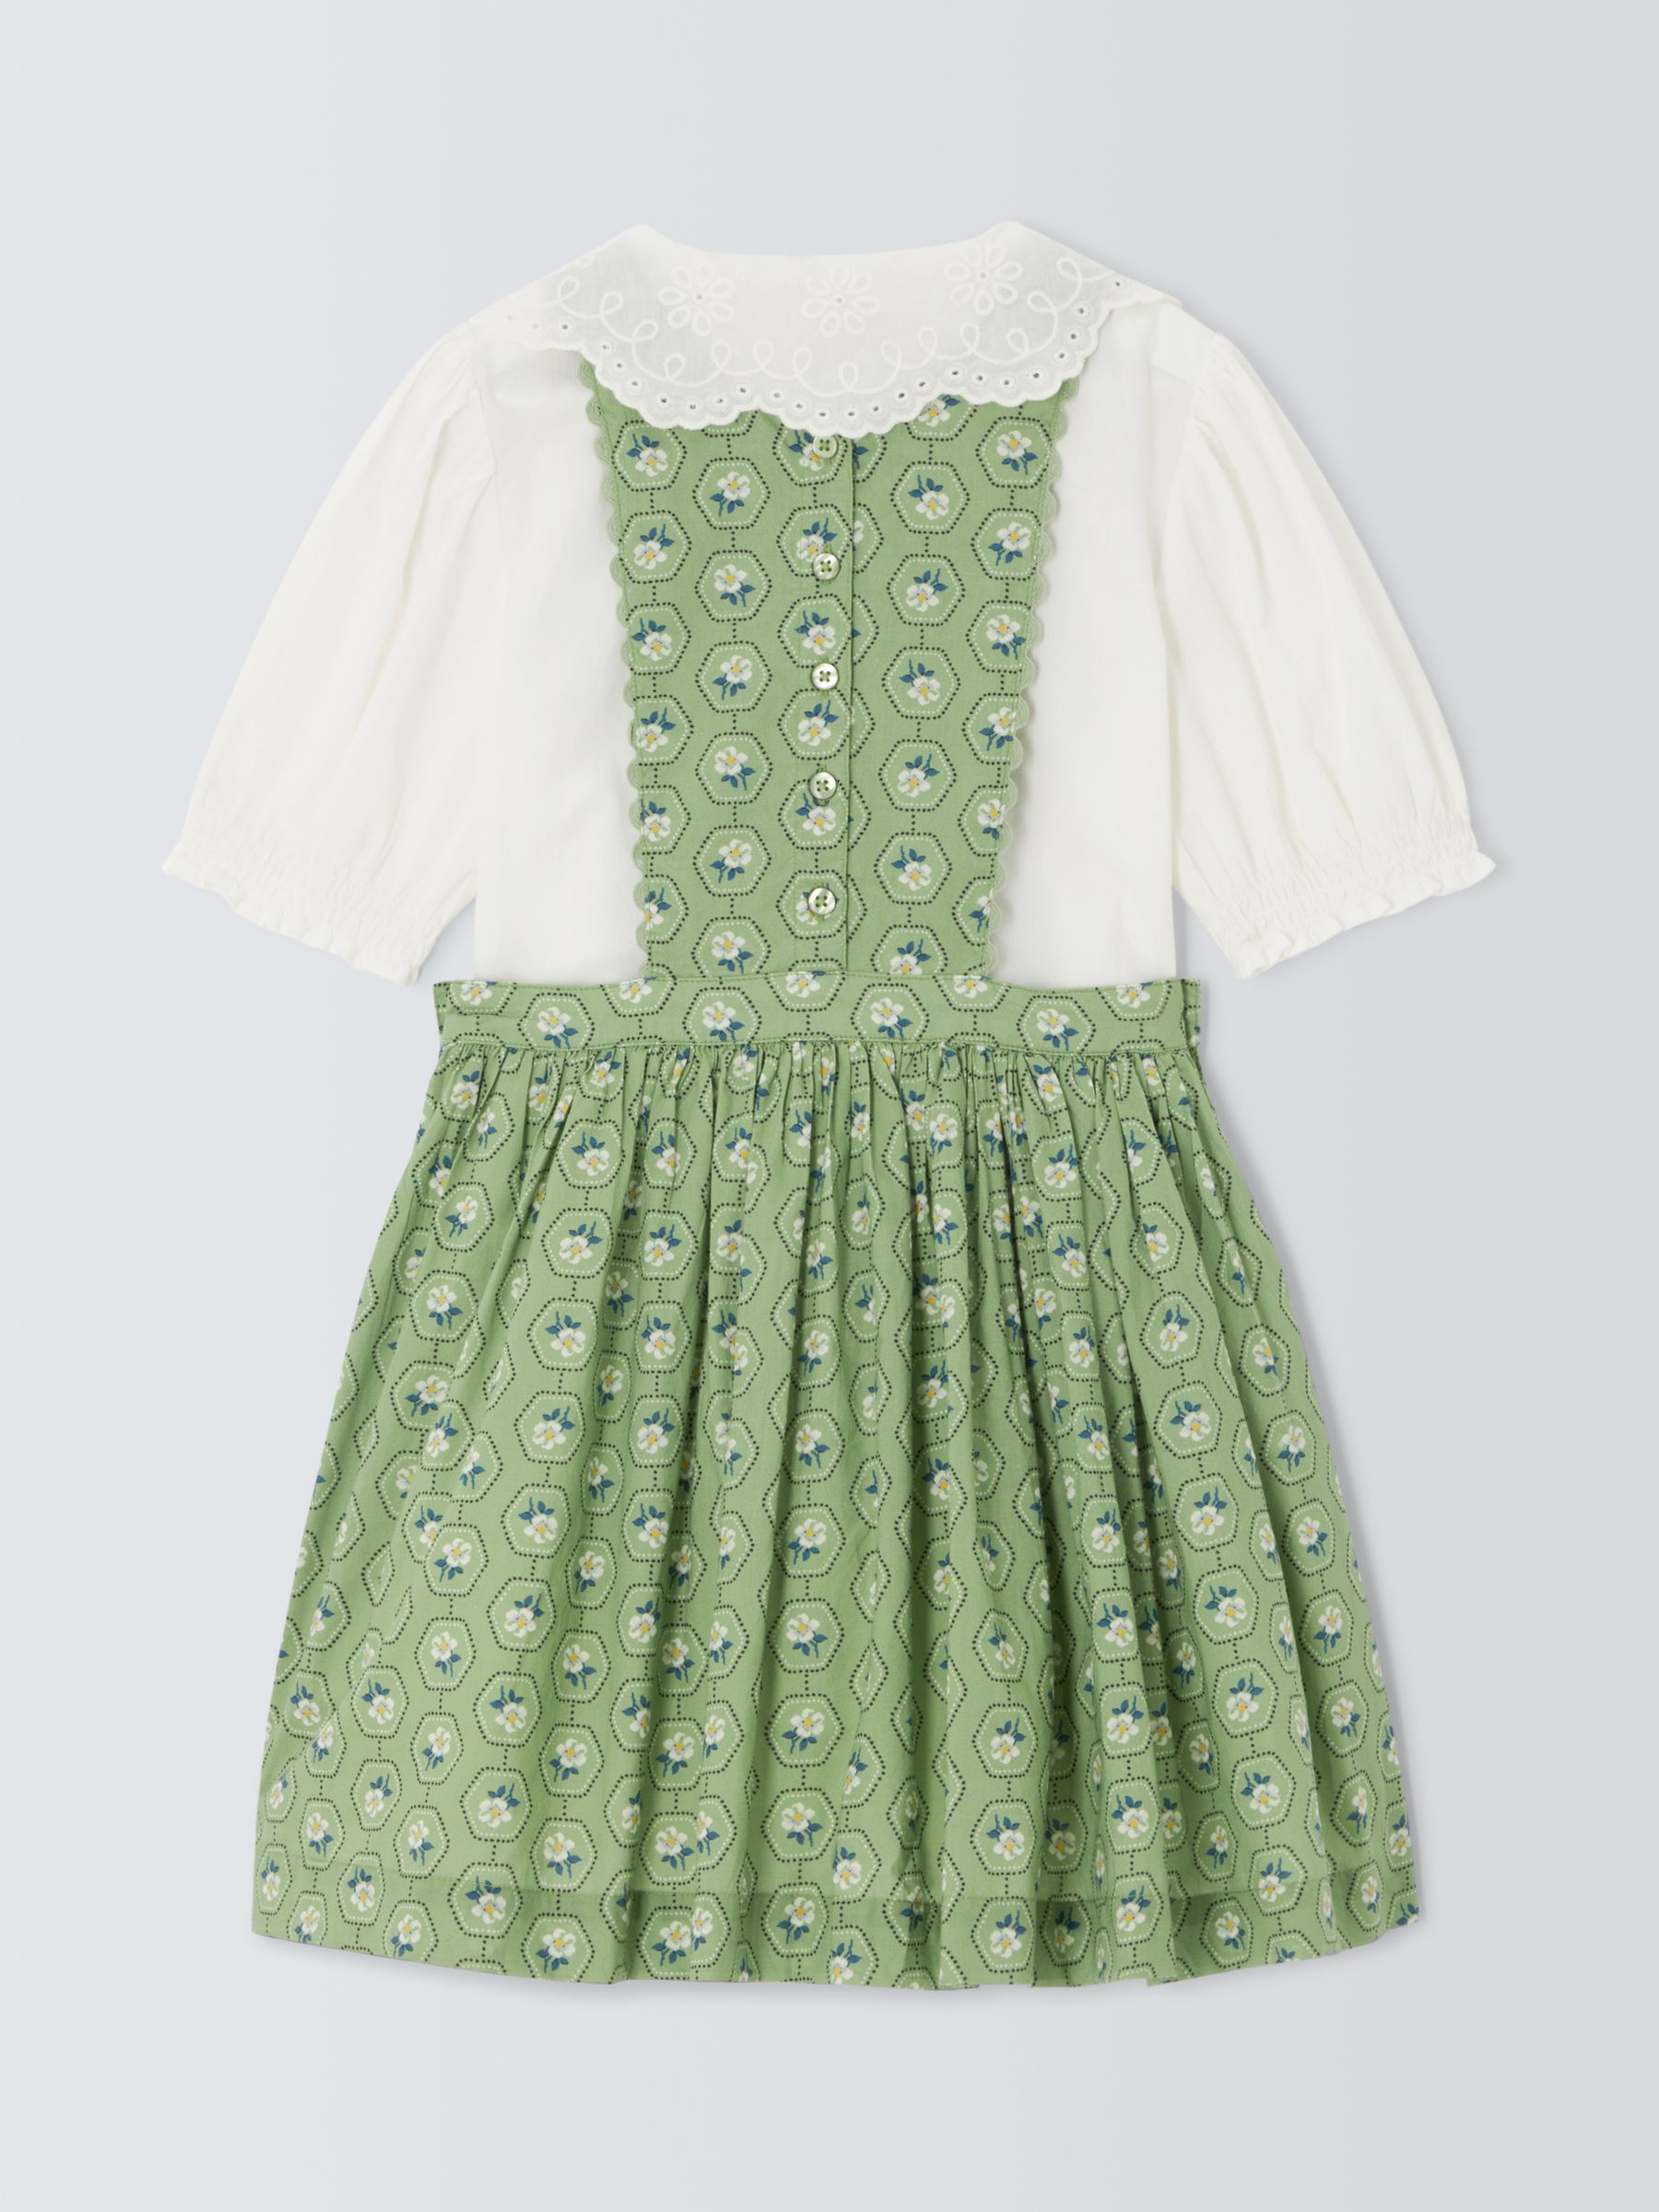 John Lewis Heirloom Collection Floral Pinafore Dress & Top Set, Multi, 7 years